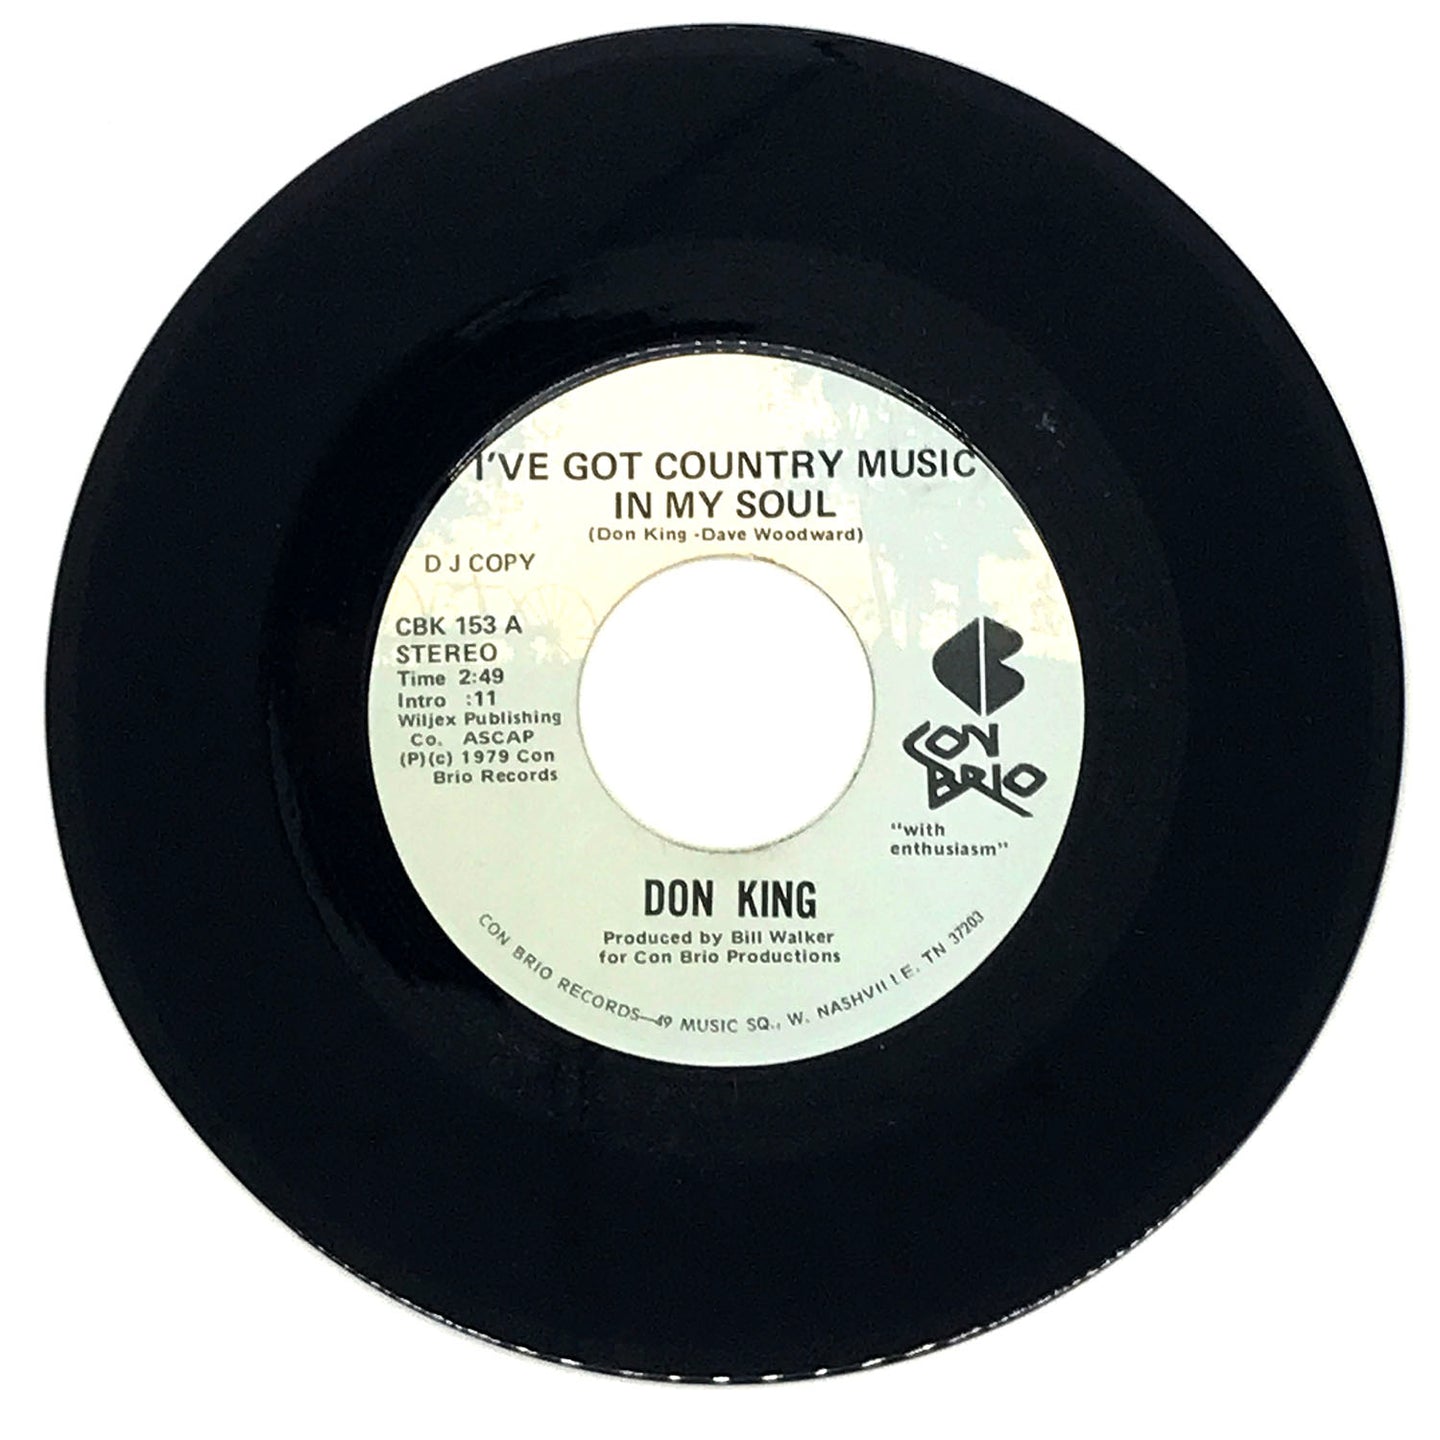 Don King : I'VE GOT COUNTRY MUSIC IN MY SOUL/ SHE'S THE GIRL OF MY DREAMS